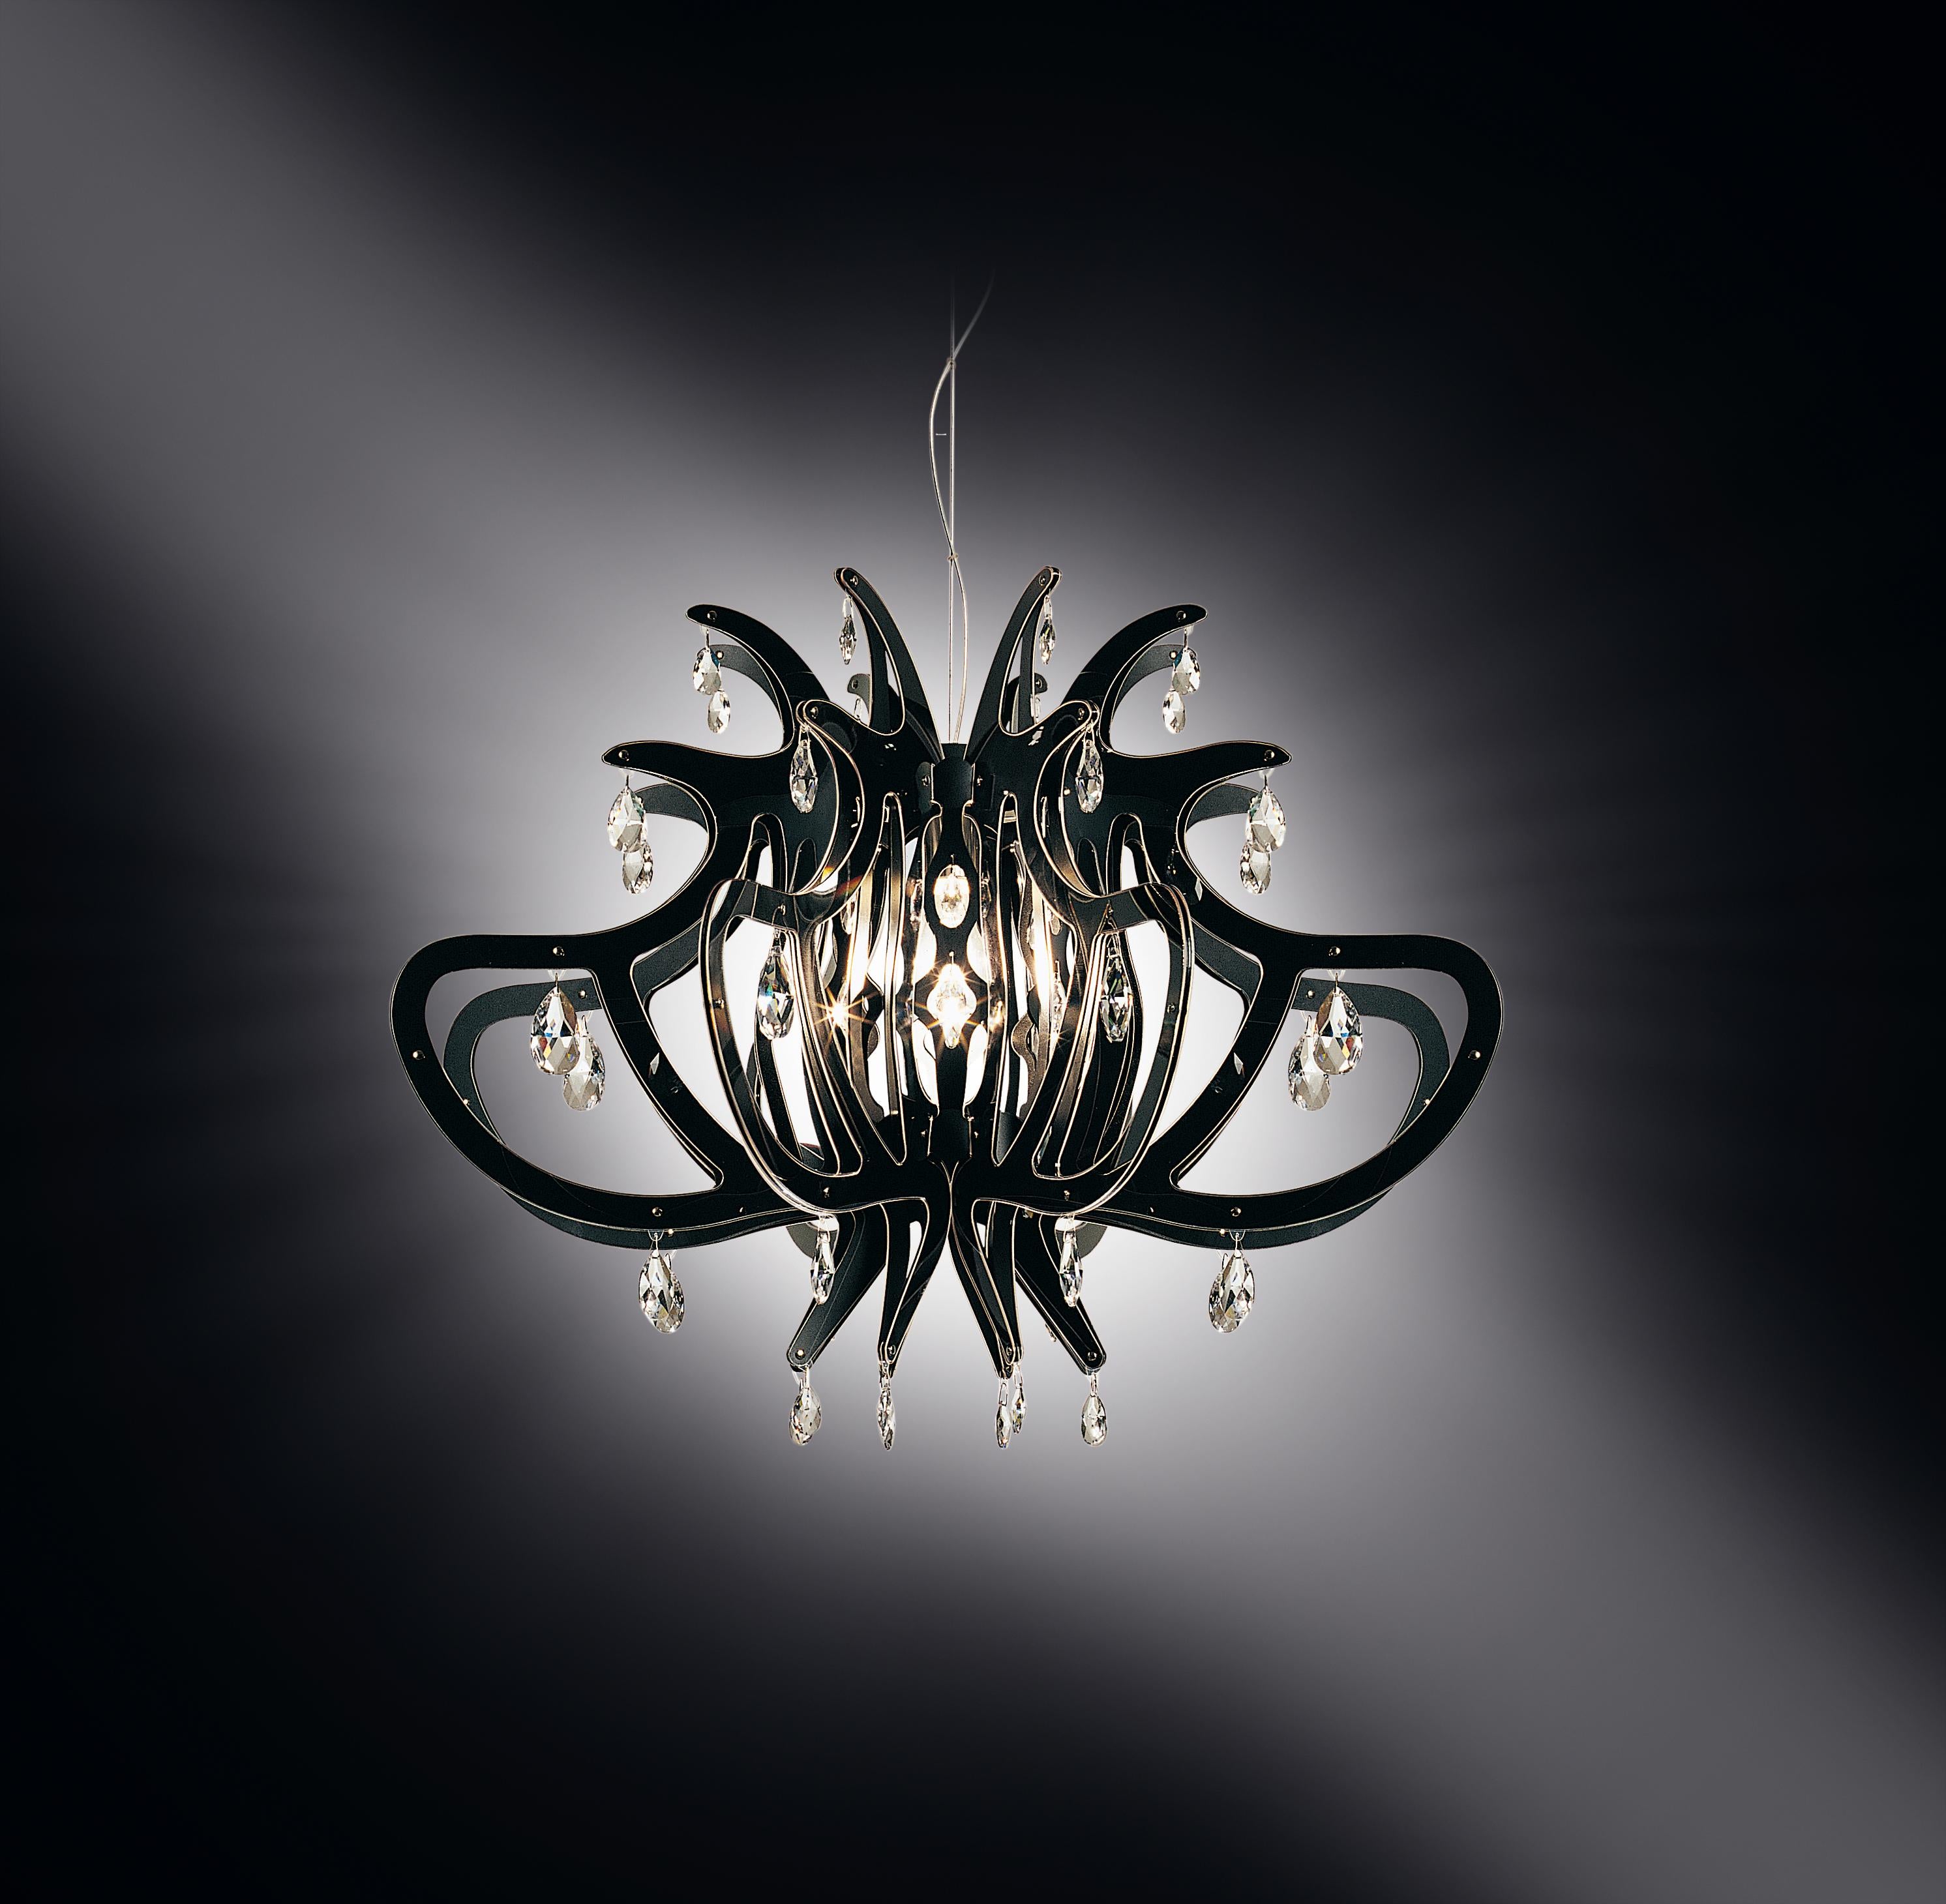 Medusa is a dramatic collection that marked SLAMP's evolution of stylistic production just after the turn of the century. The radial structure easily connects to the central Cristalflex® cylinder, that reflects the added luxury of transparent